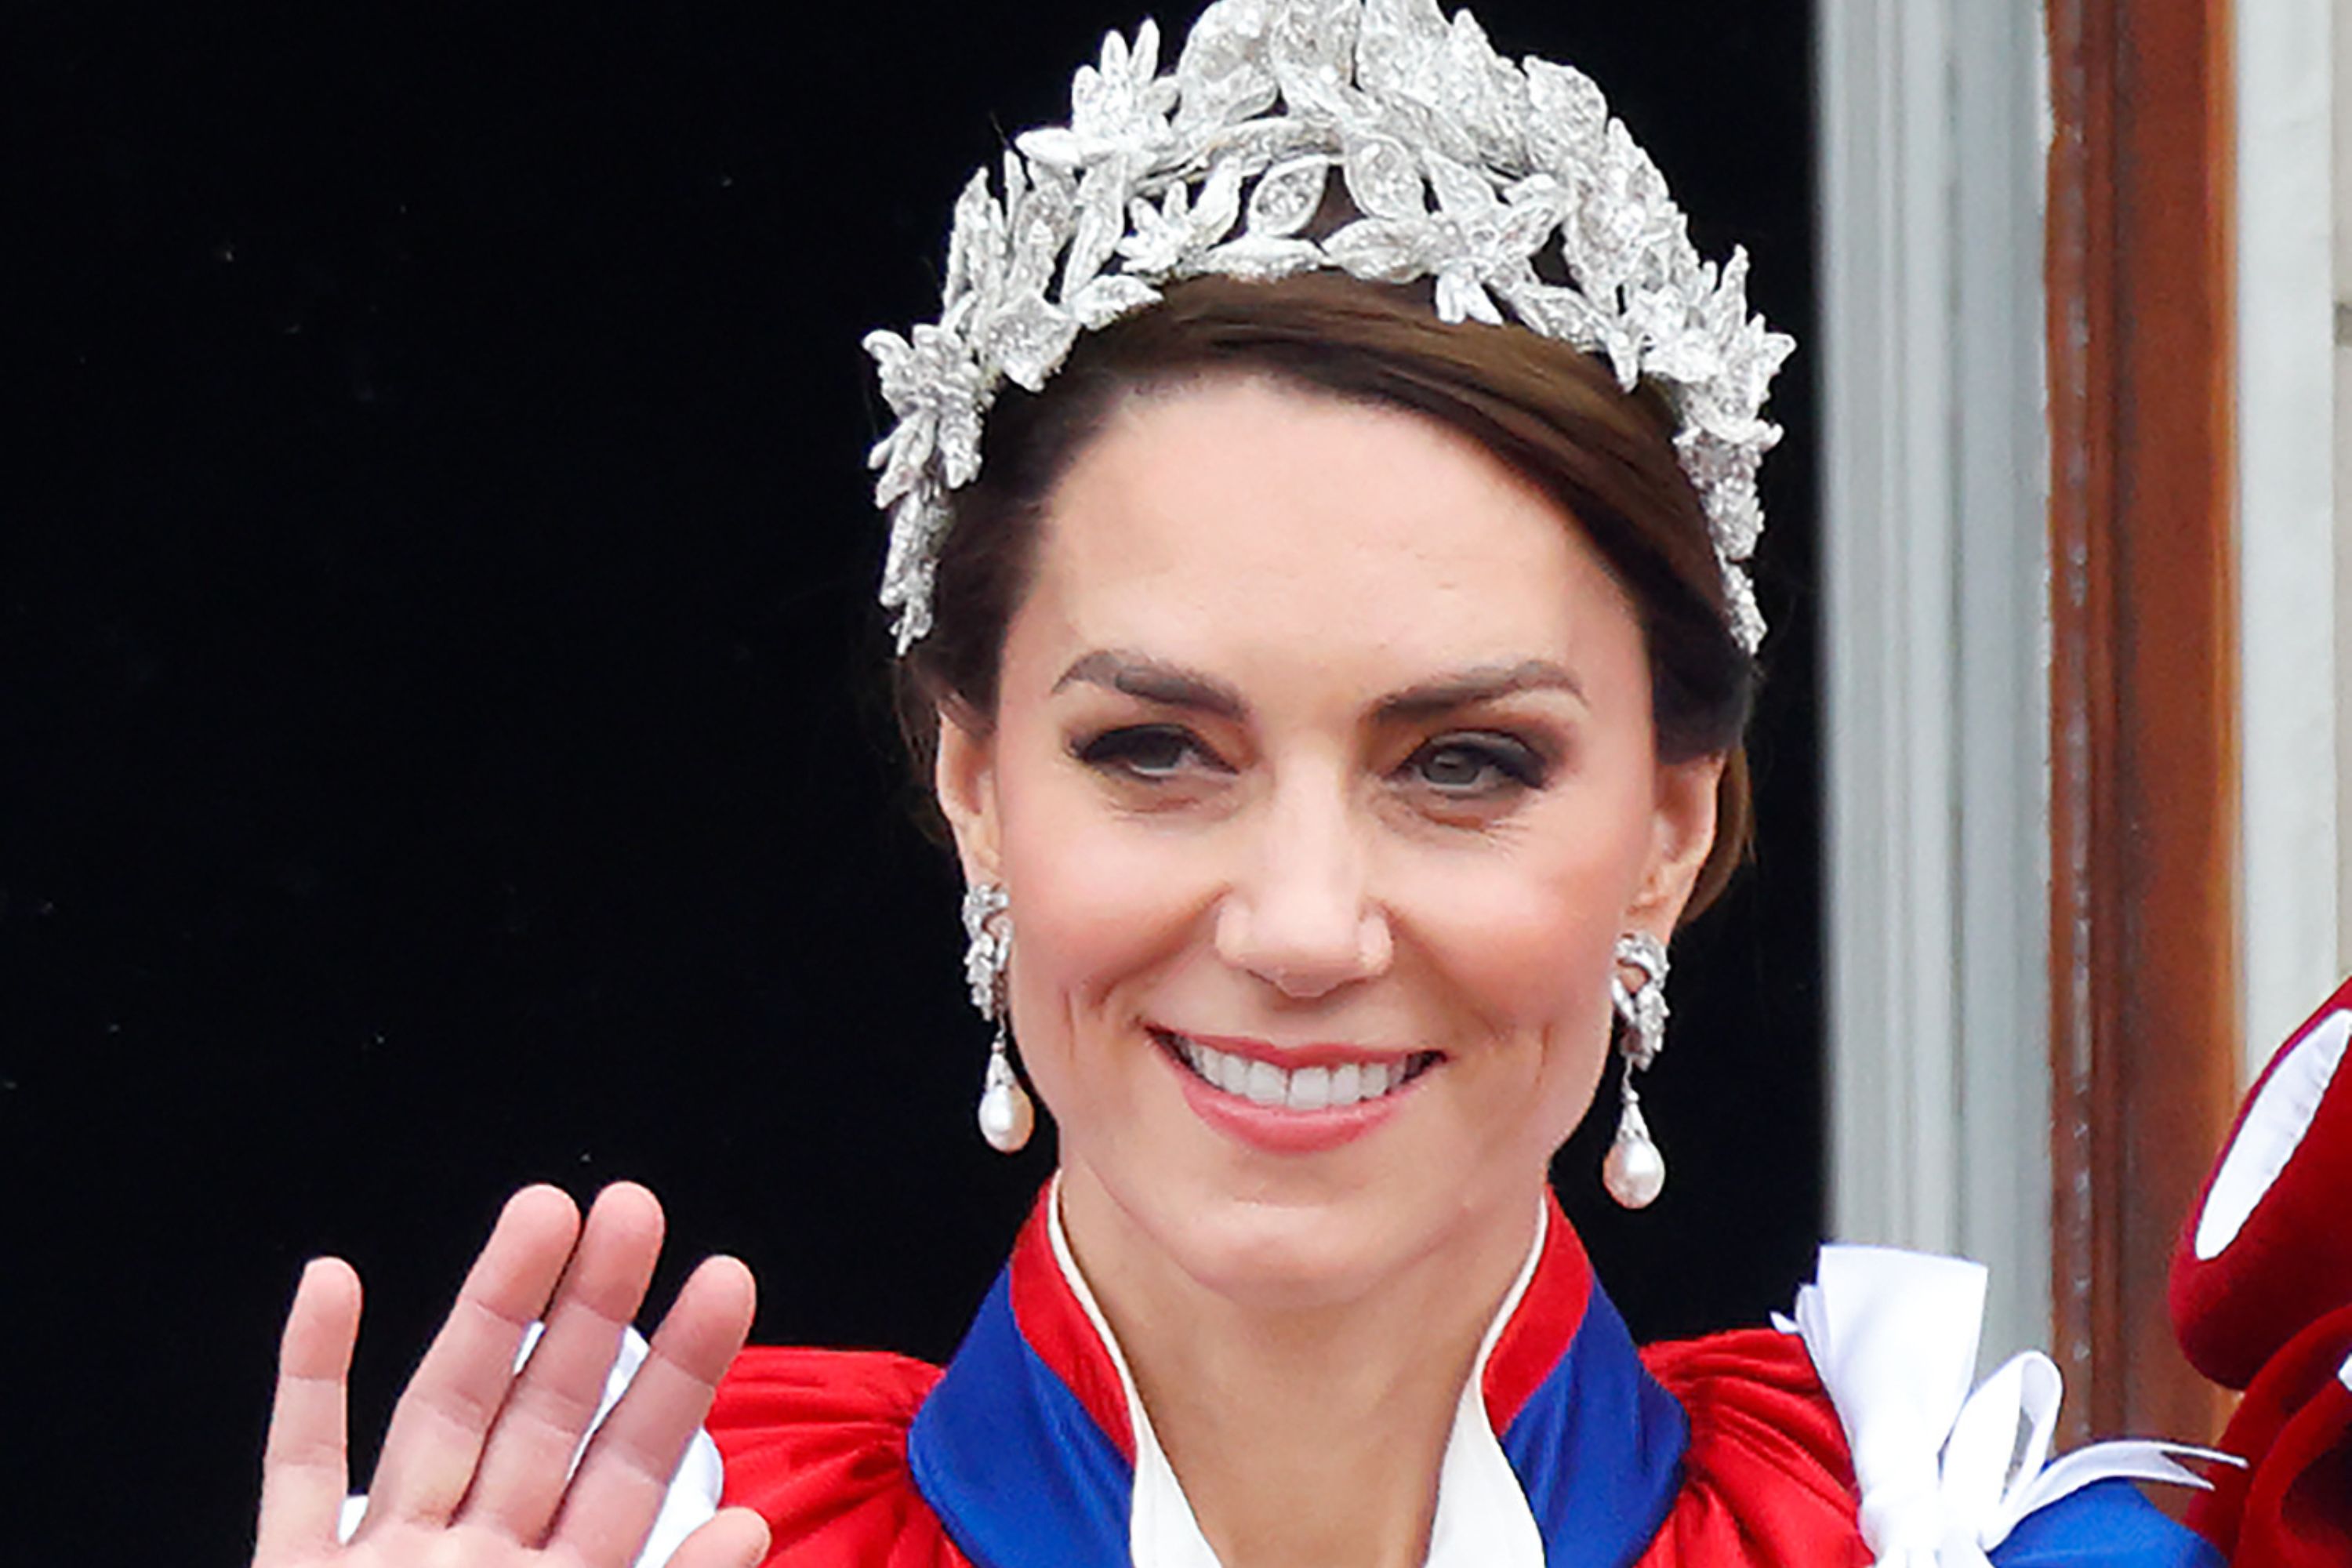 Kate Middleton's Transformation From Bullied School Pupil to Princess